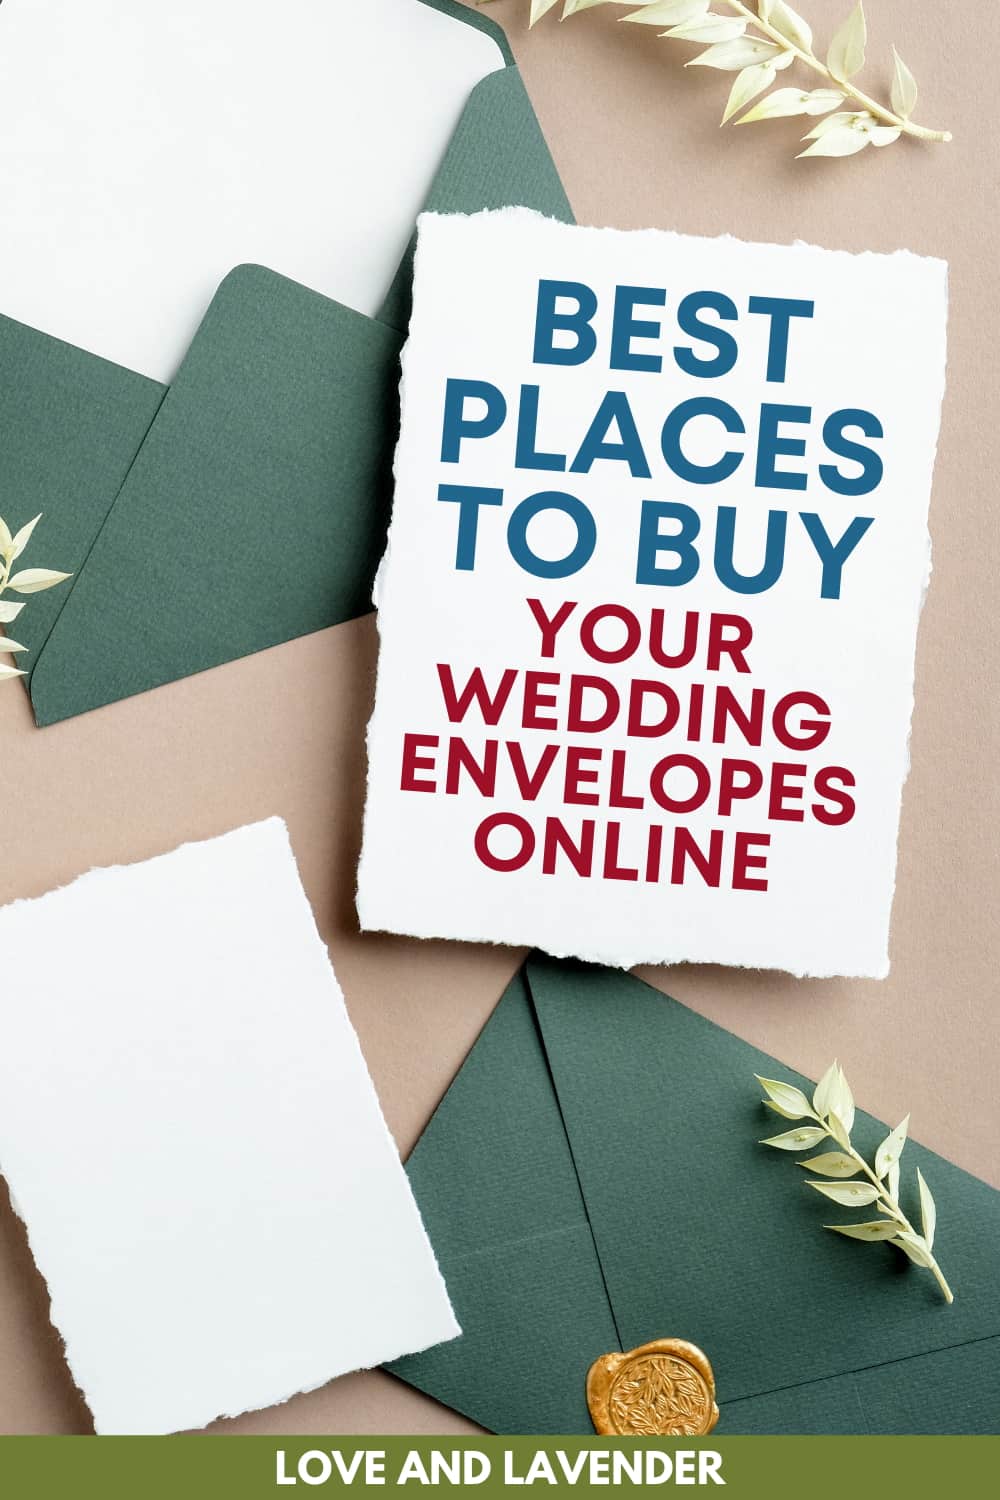 The Best Place to Buy Wedding Envelopes Online